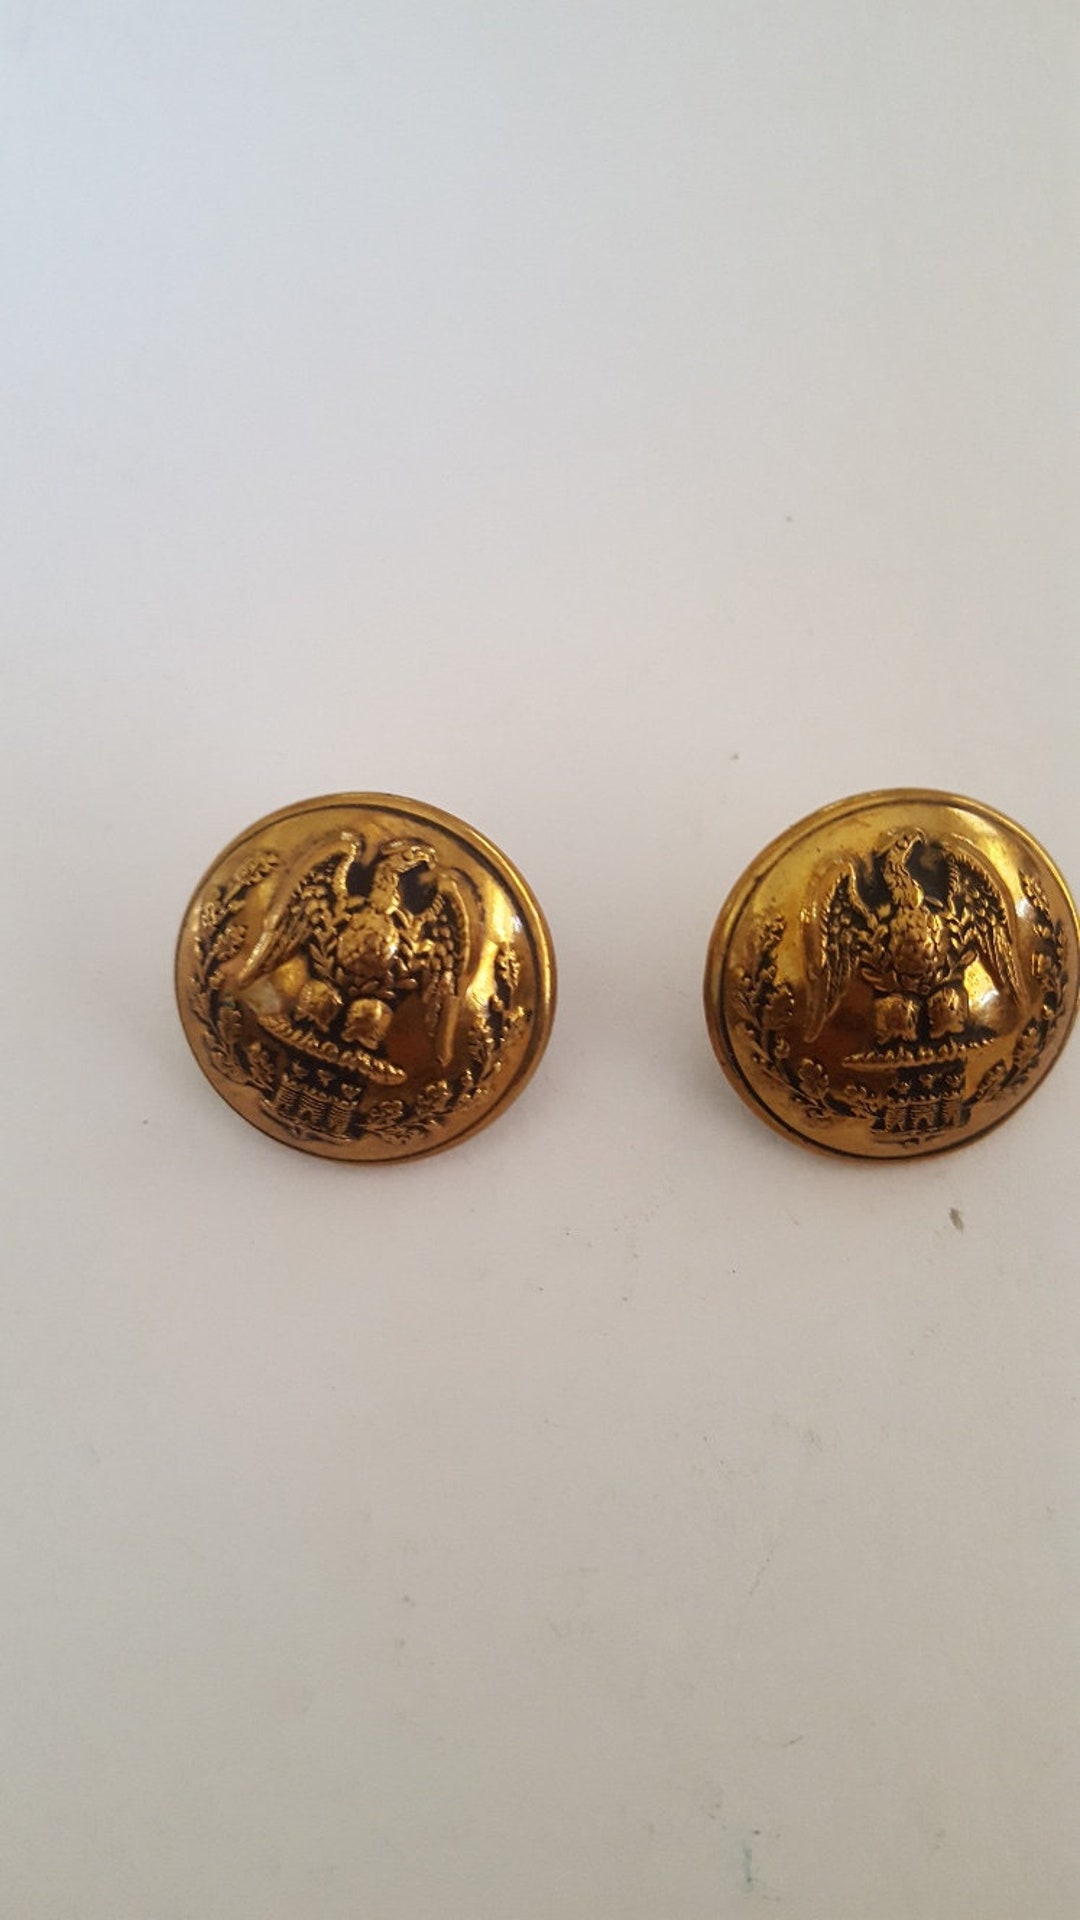 Antique Uniform Buttons by Pitt & Co. 31 Maddox St. London W. Left ...